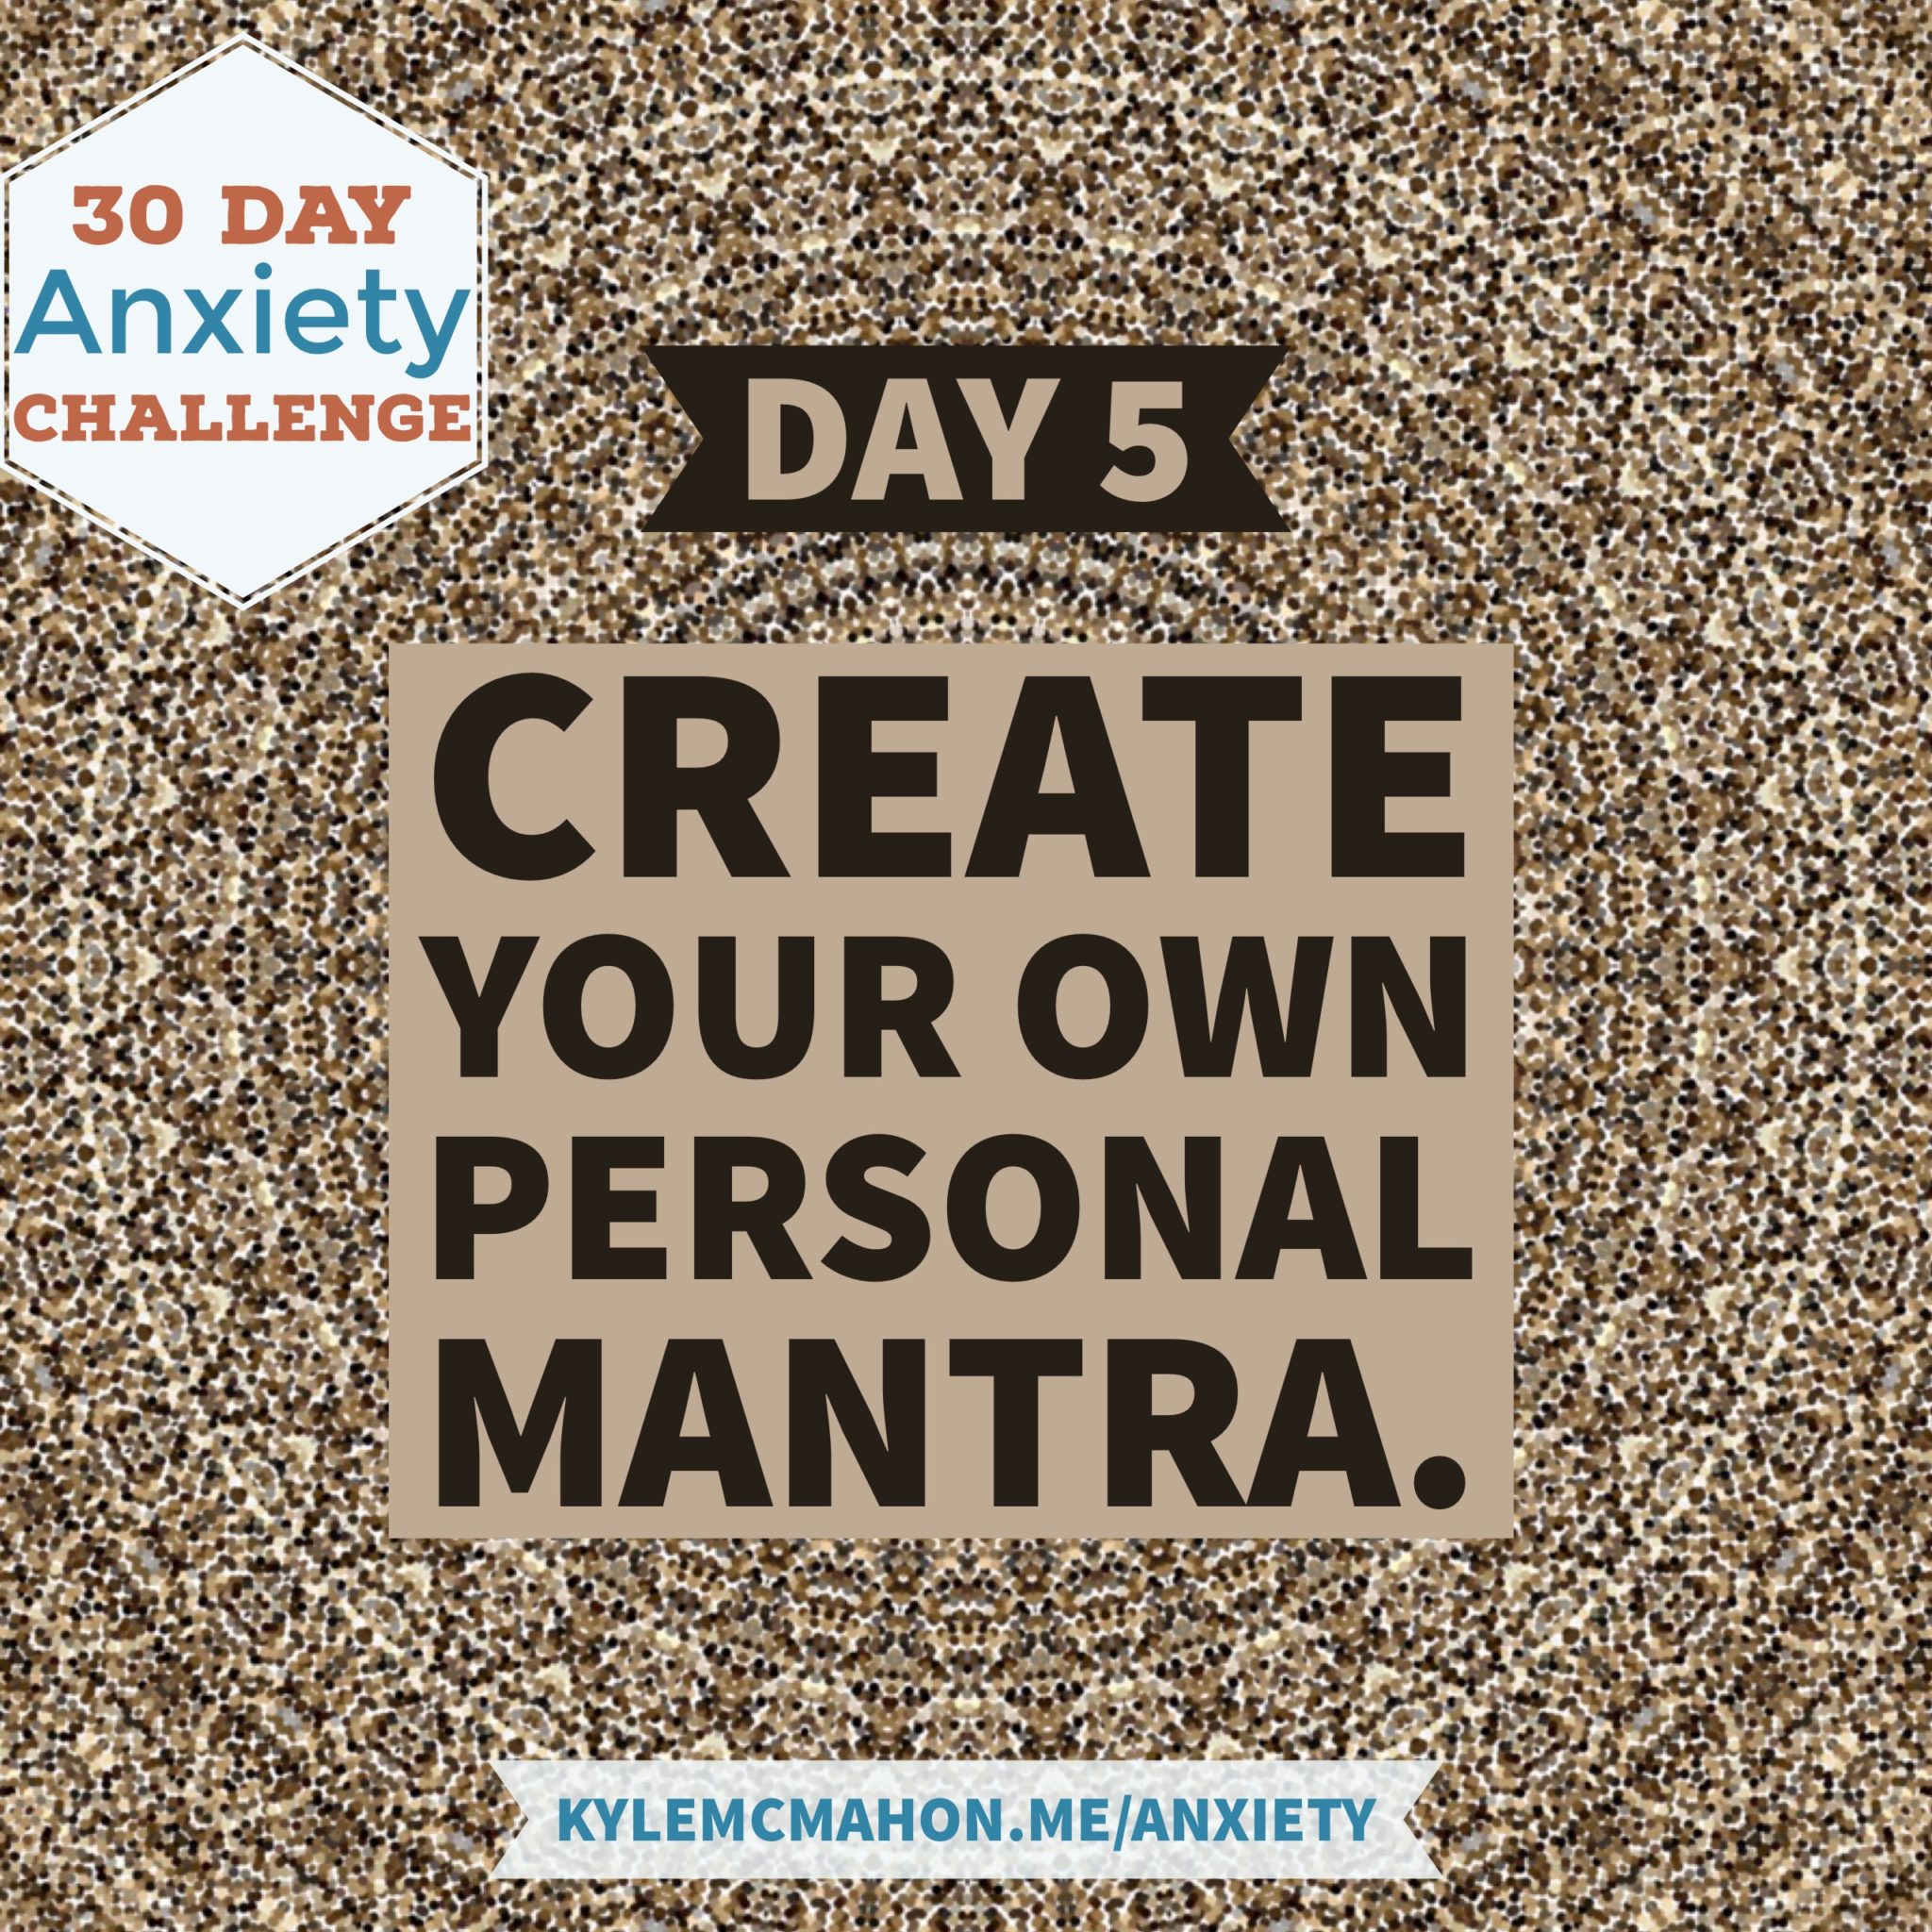 Day 5 * 30 Day Anxiety Challenge with Kyle McMahon - personal mantra